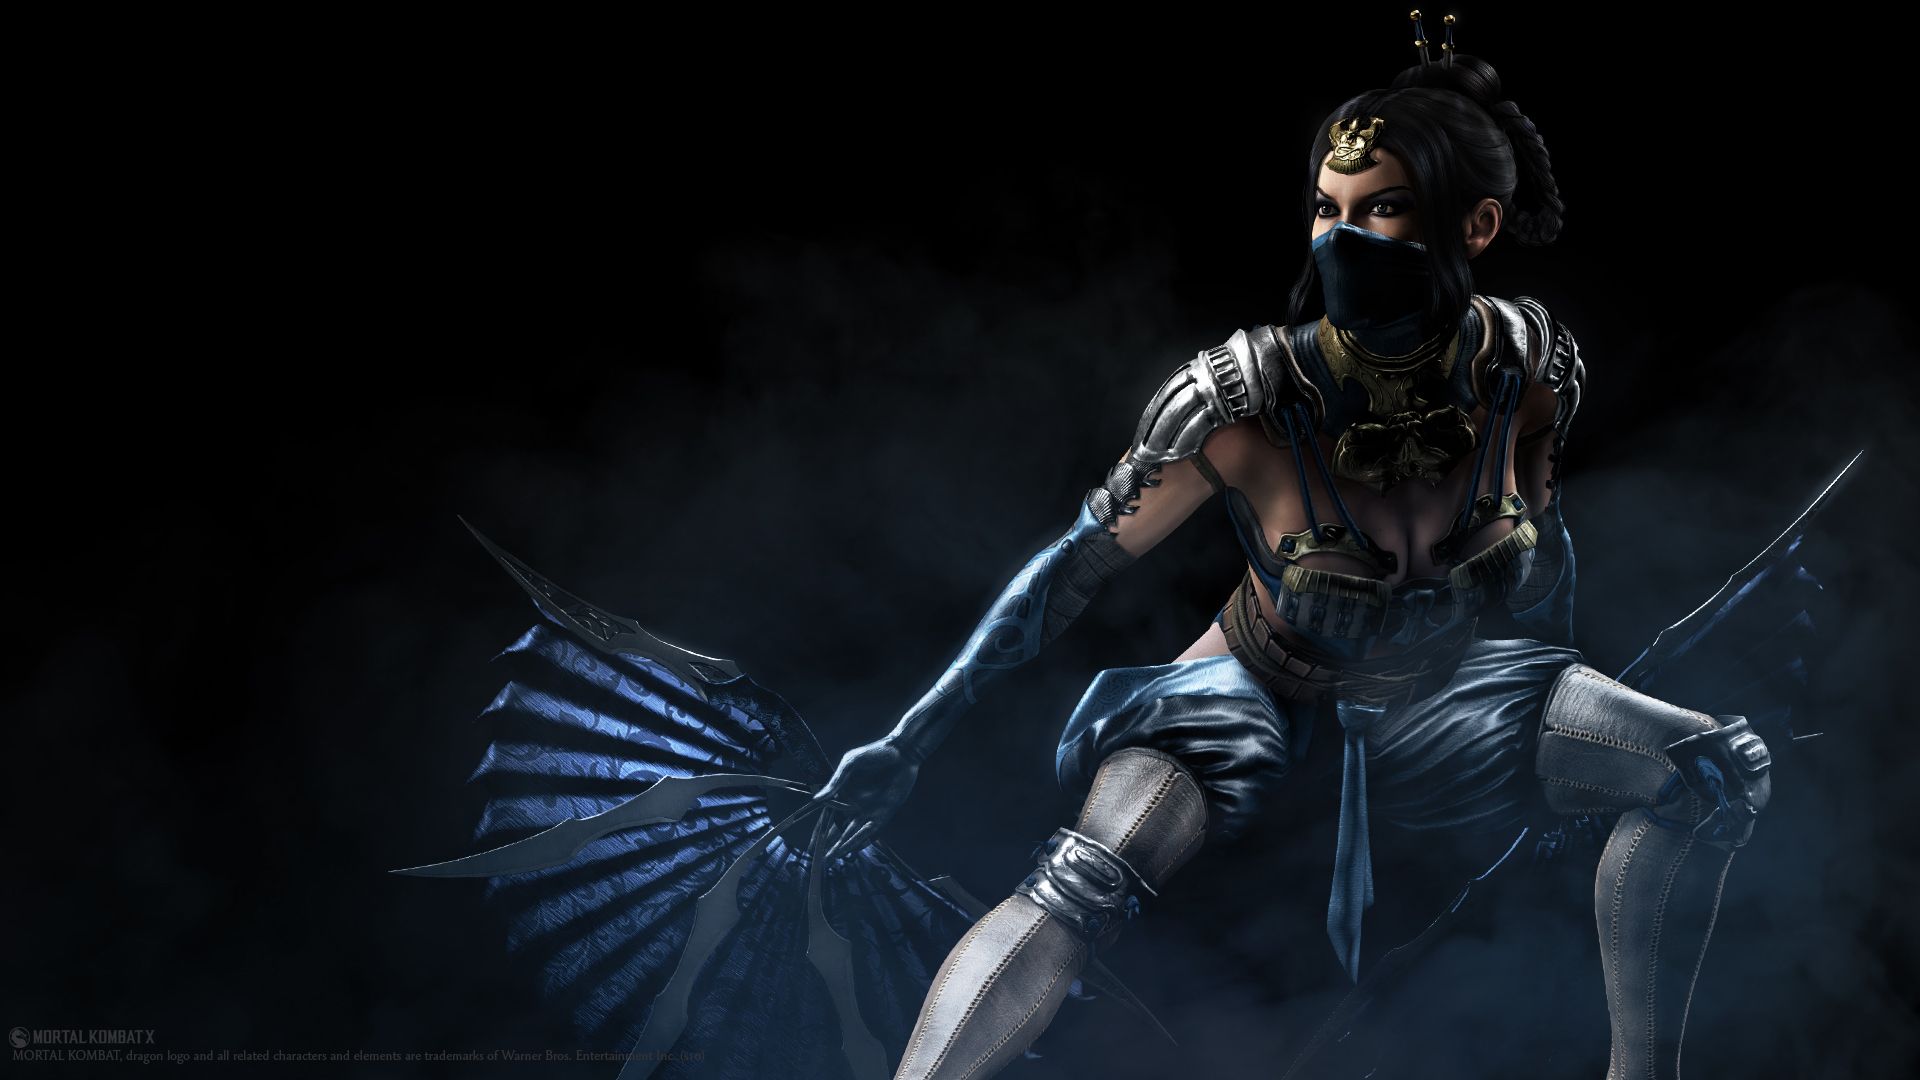 How to Do Every Fatality in Mortal Kombat X